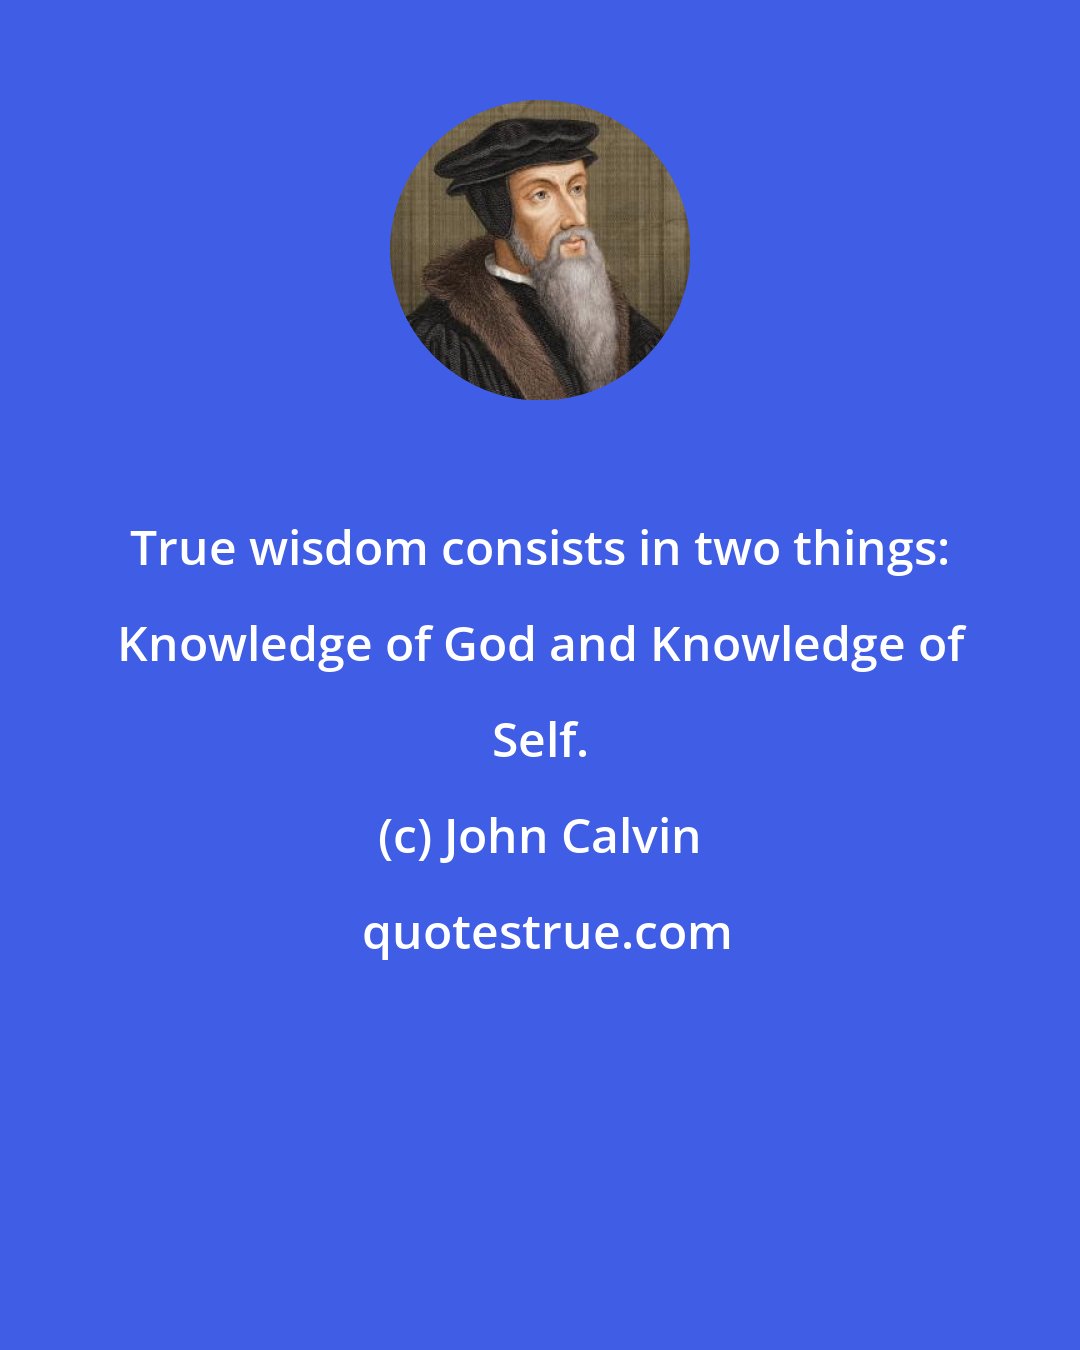 John Calvin: True wisdom consists in two things: Knowledge of God and Knowledge of Self.